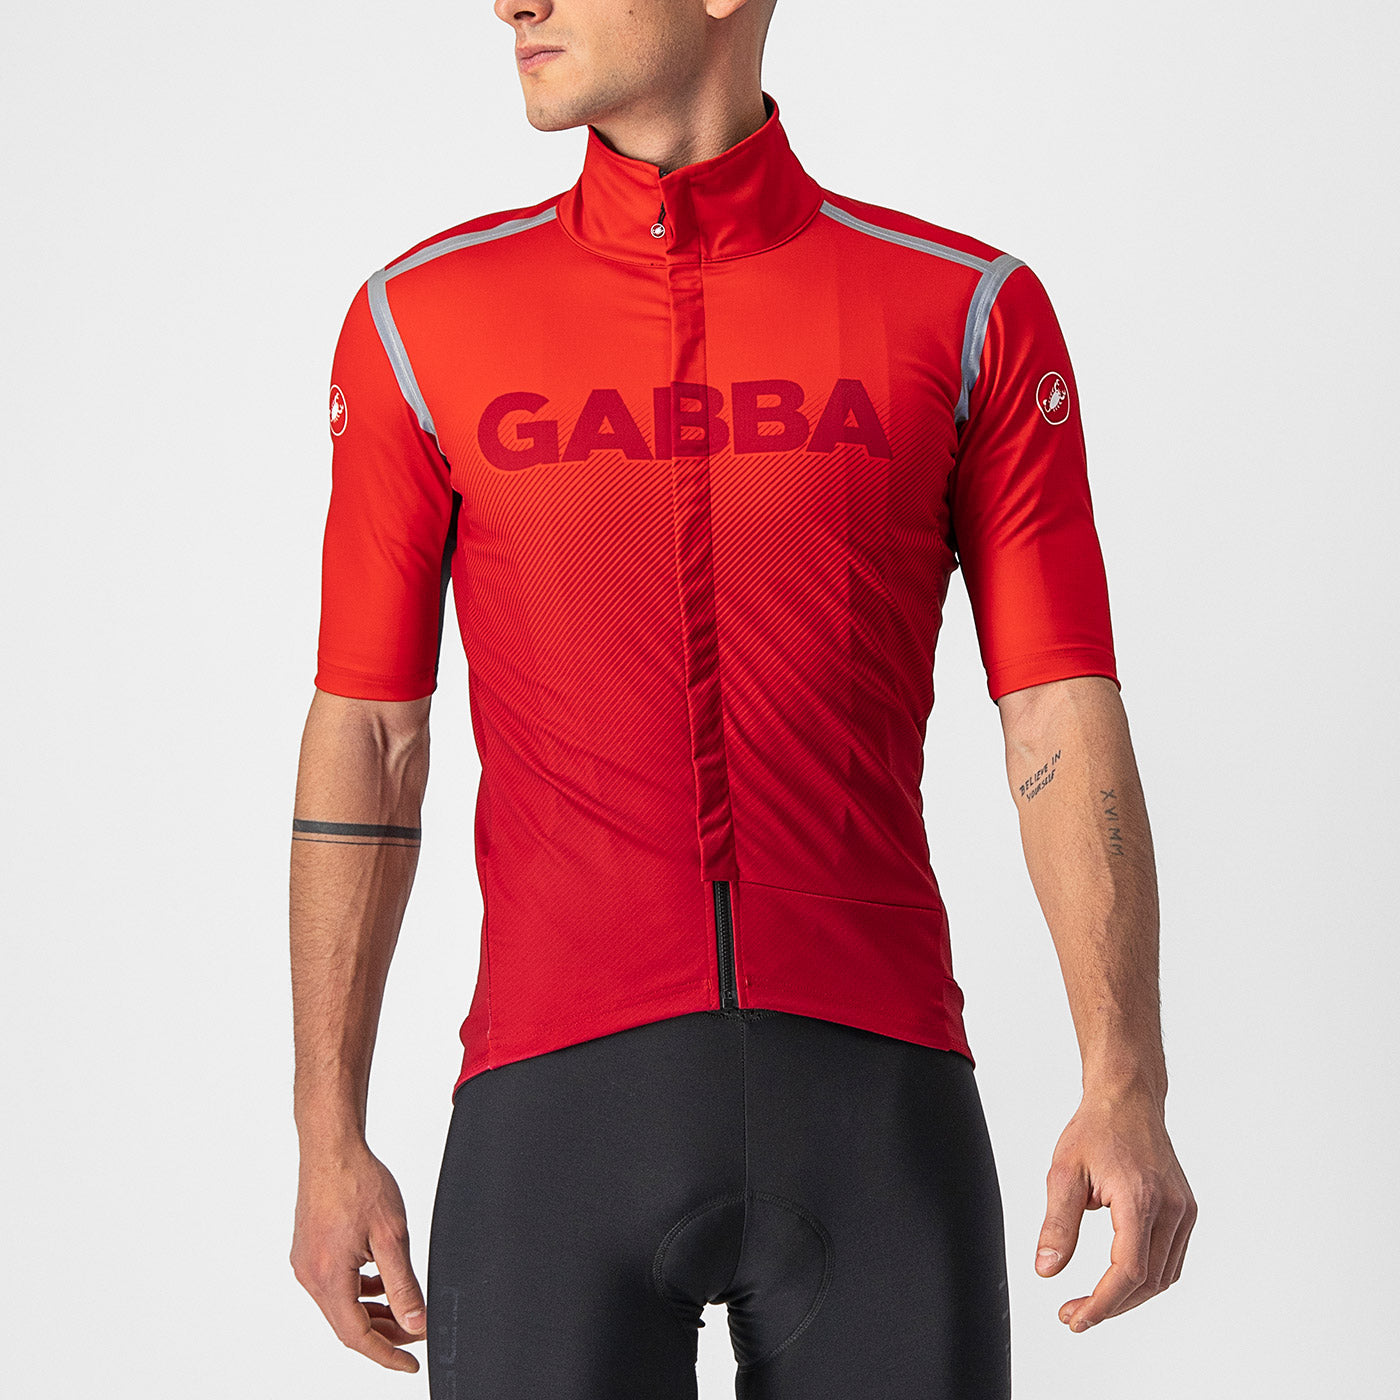 Maillot Castelli Gabba RoS Special - Rojo | All4cycling